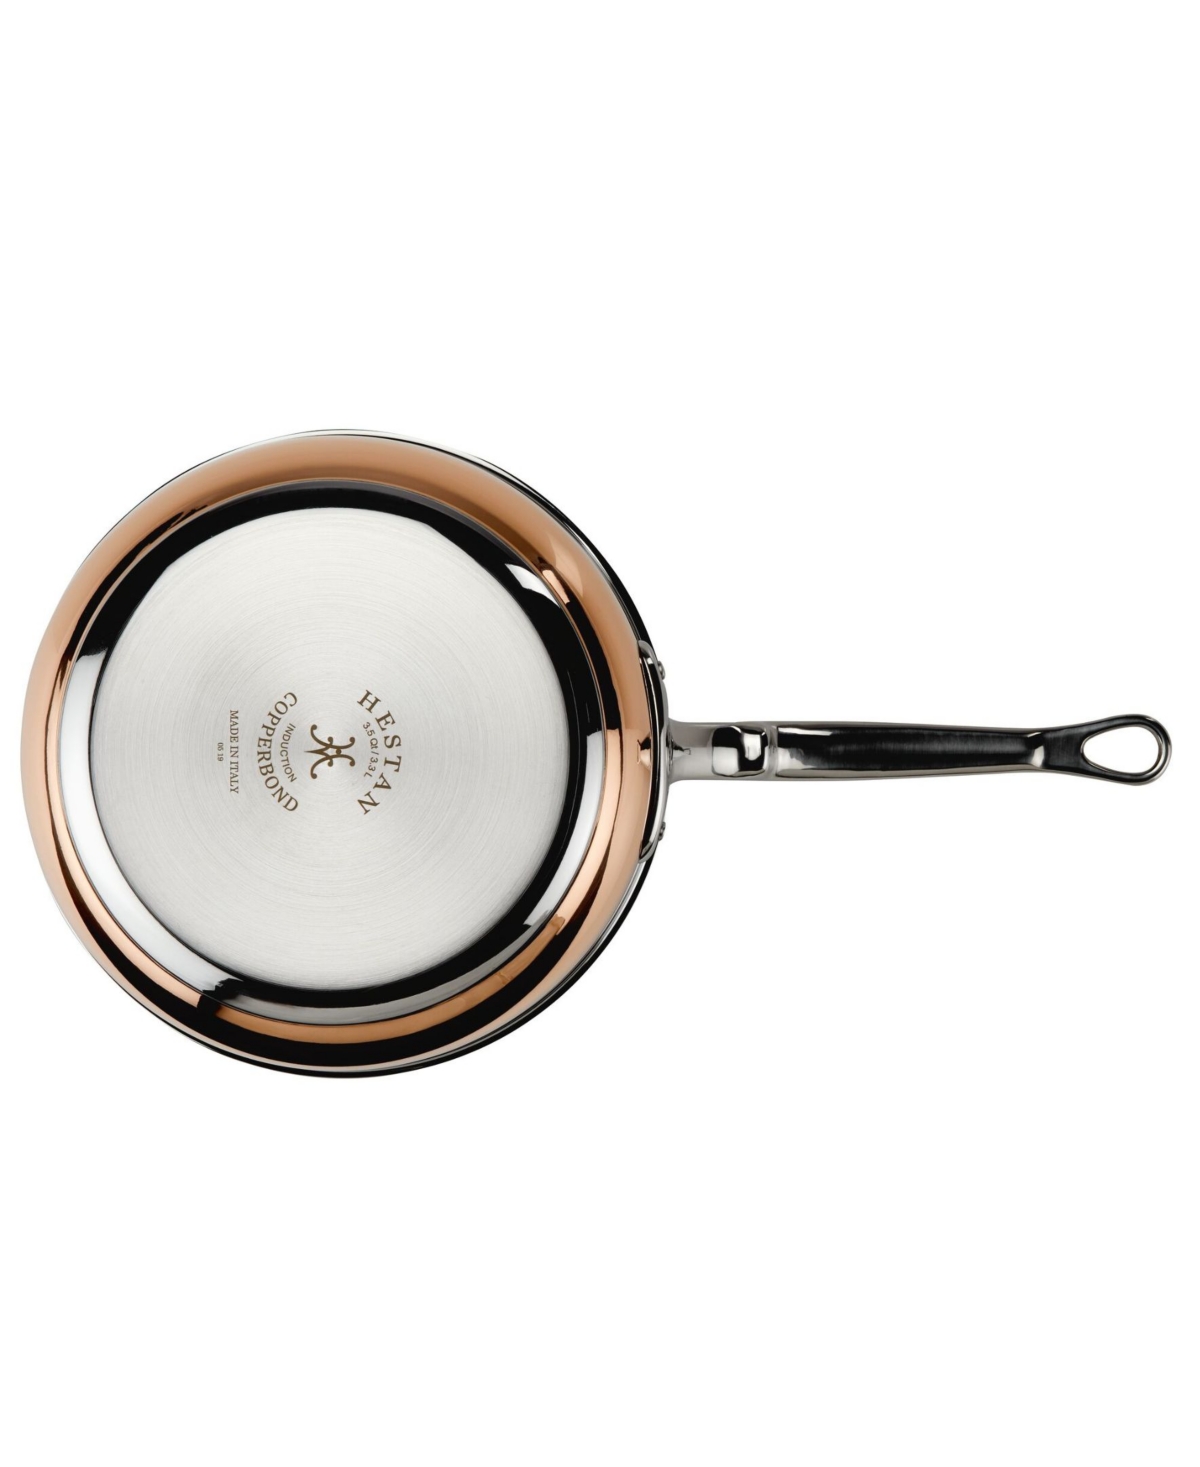 Shop Hestan Copperbond Copper Induction 3.5-quart Covered Essential Pan With Helper Handle